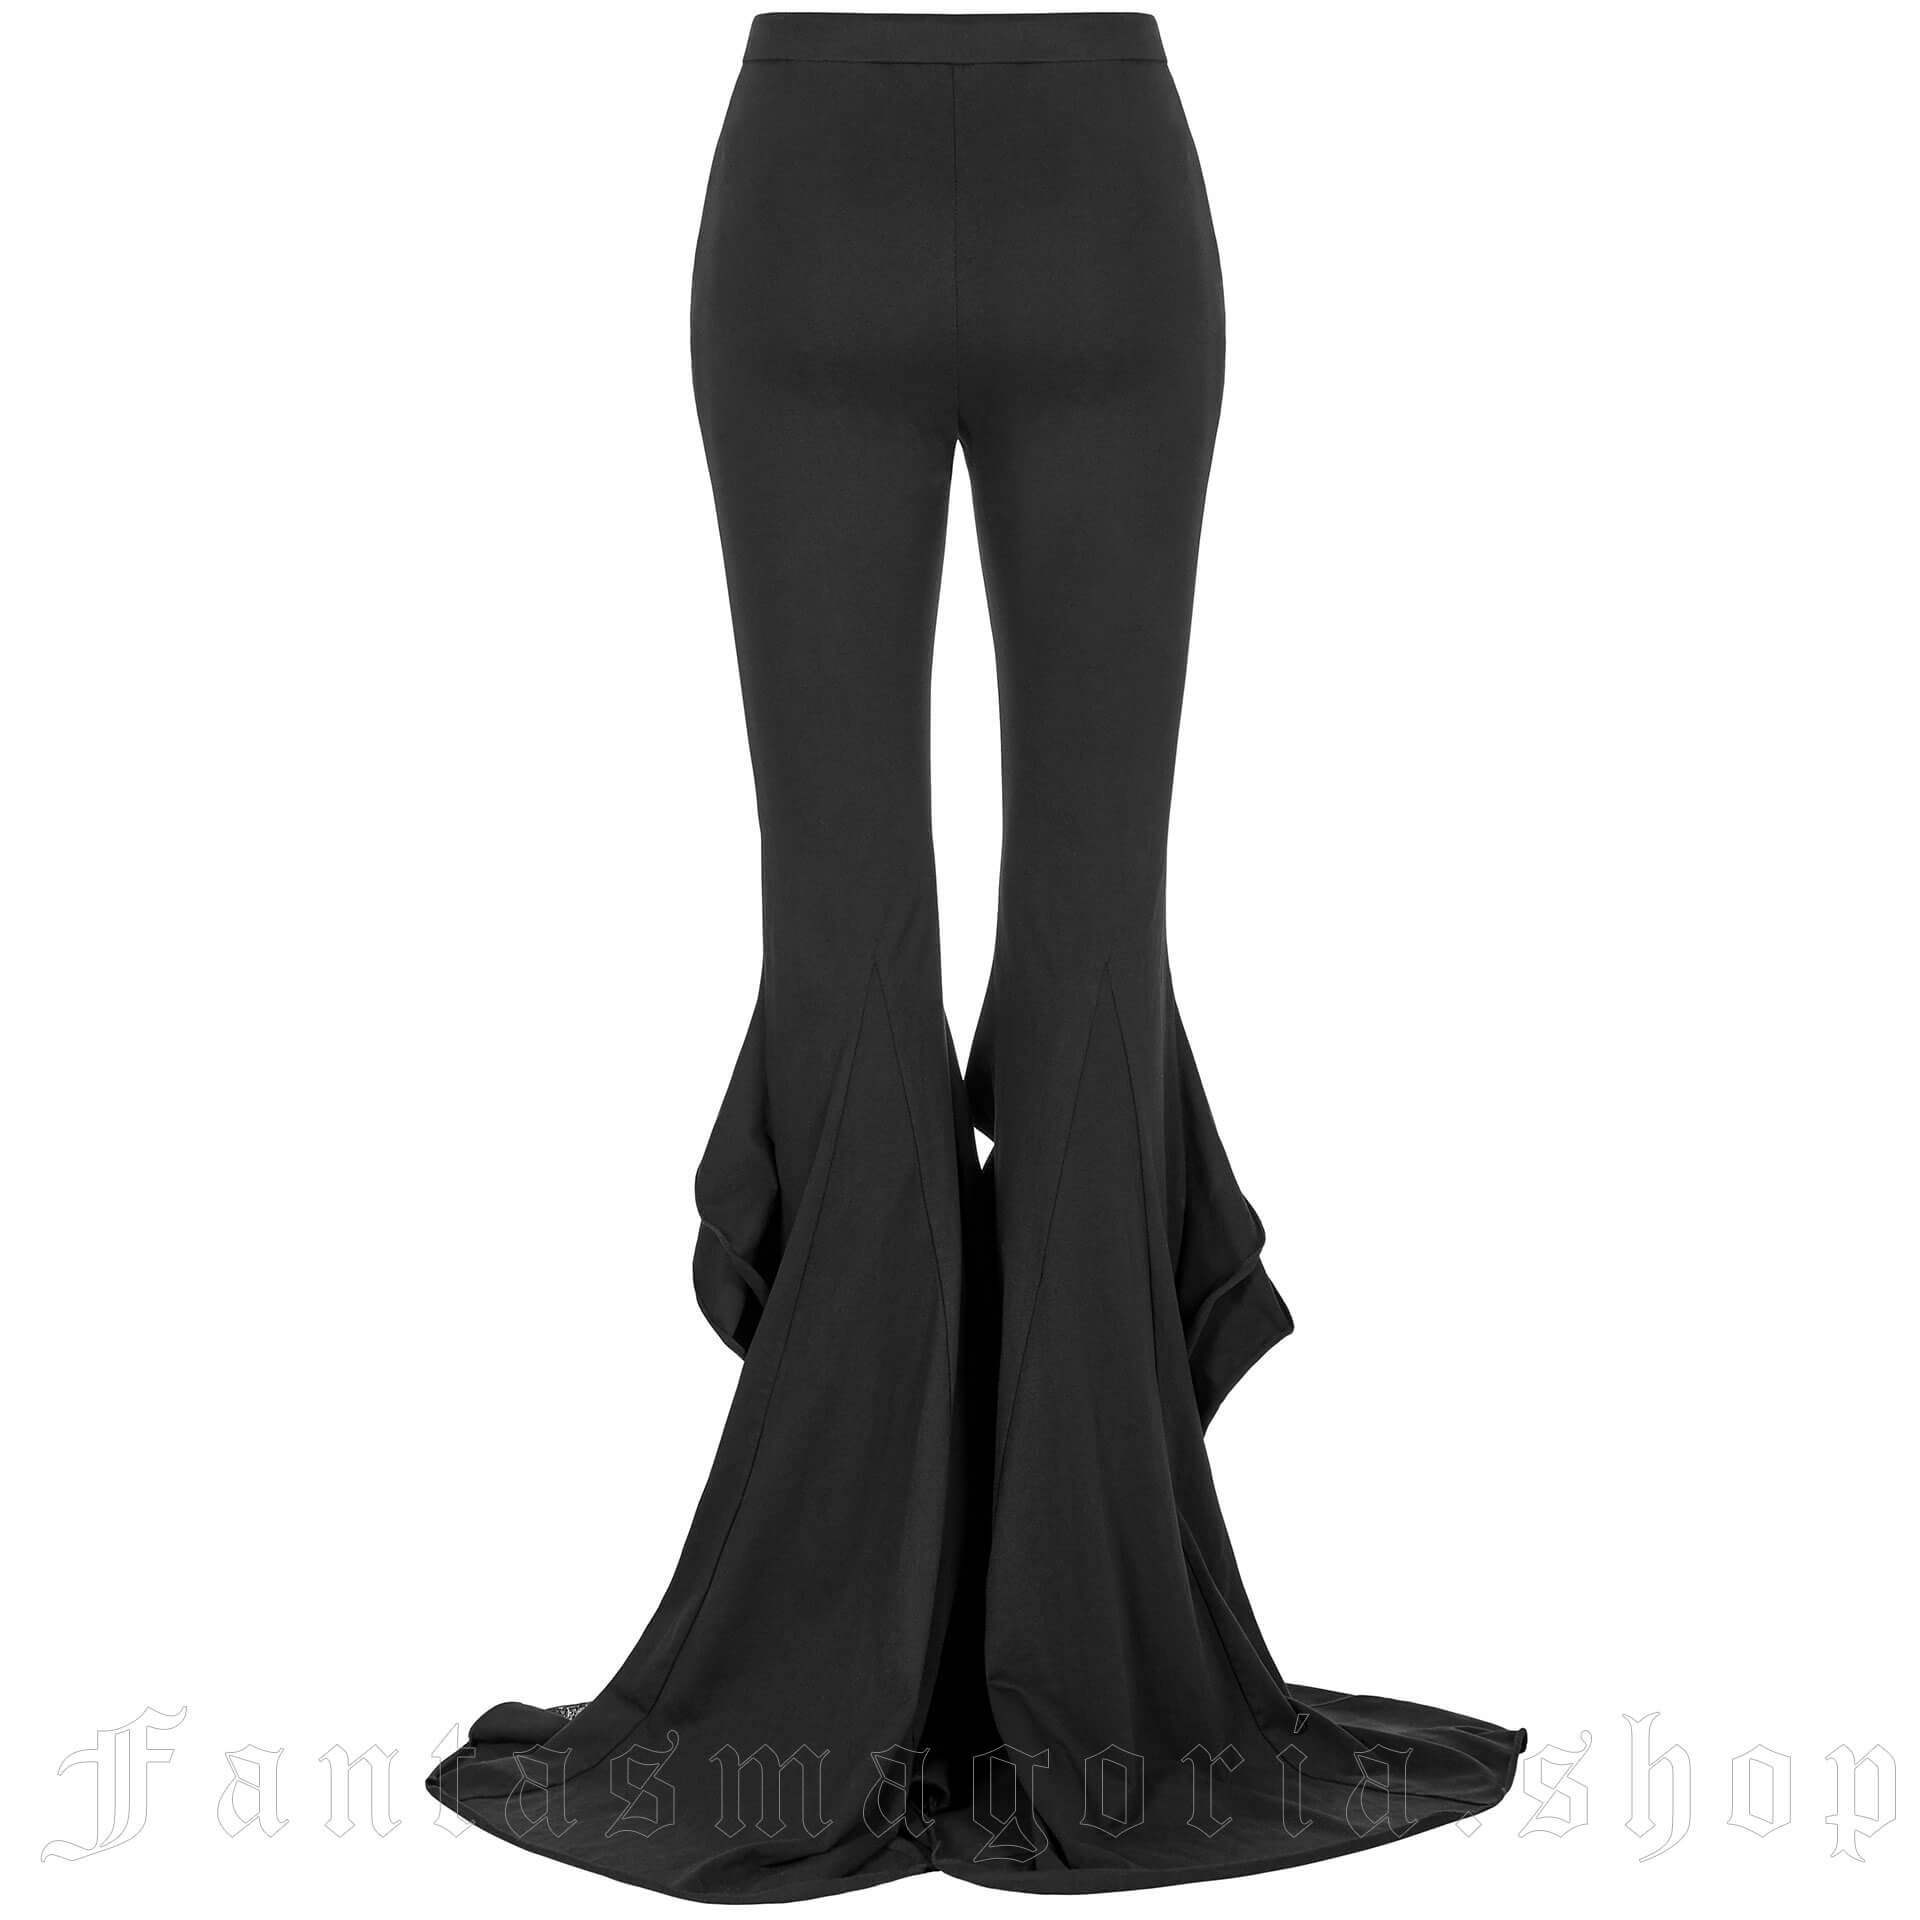 Plus Size Pants for Women Stretchy Straight Leg Comfy Solid Classic High  Waisted Wide Leg Long Bootcut Pant Slacks Work Office Casual Pants 